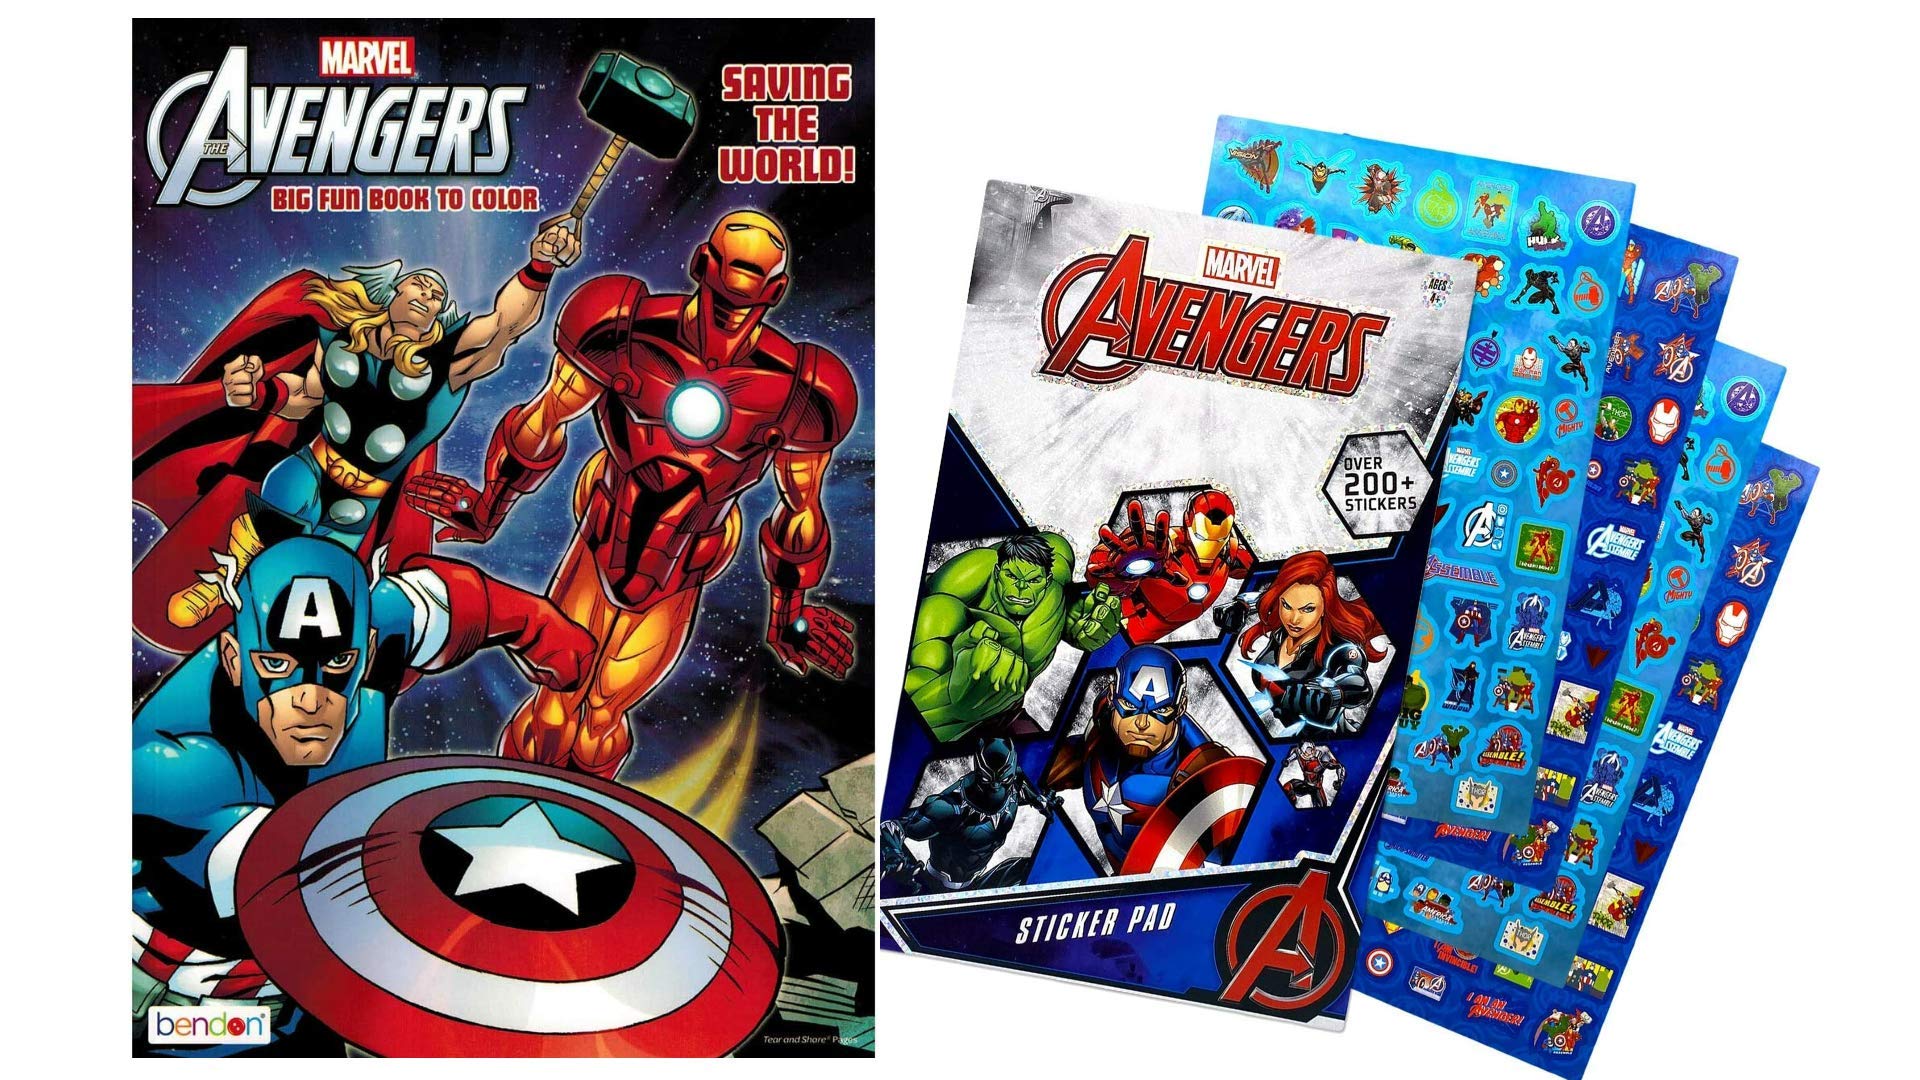 Avengers page coloring book marvel avengers hero sticker book over